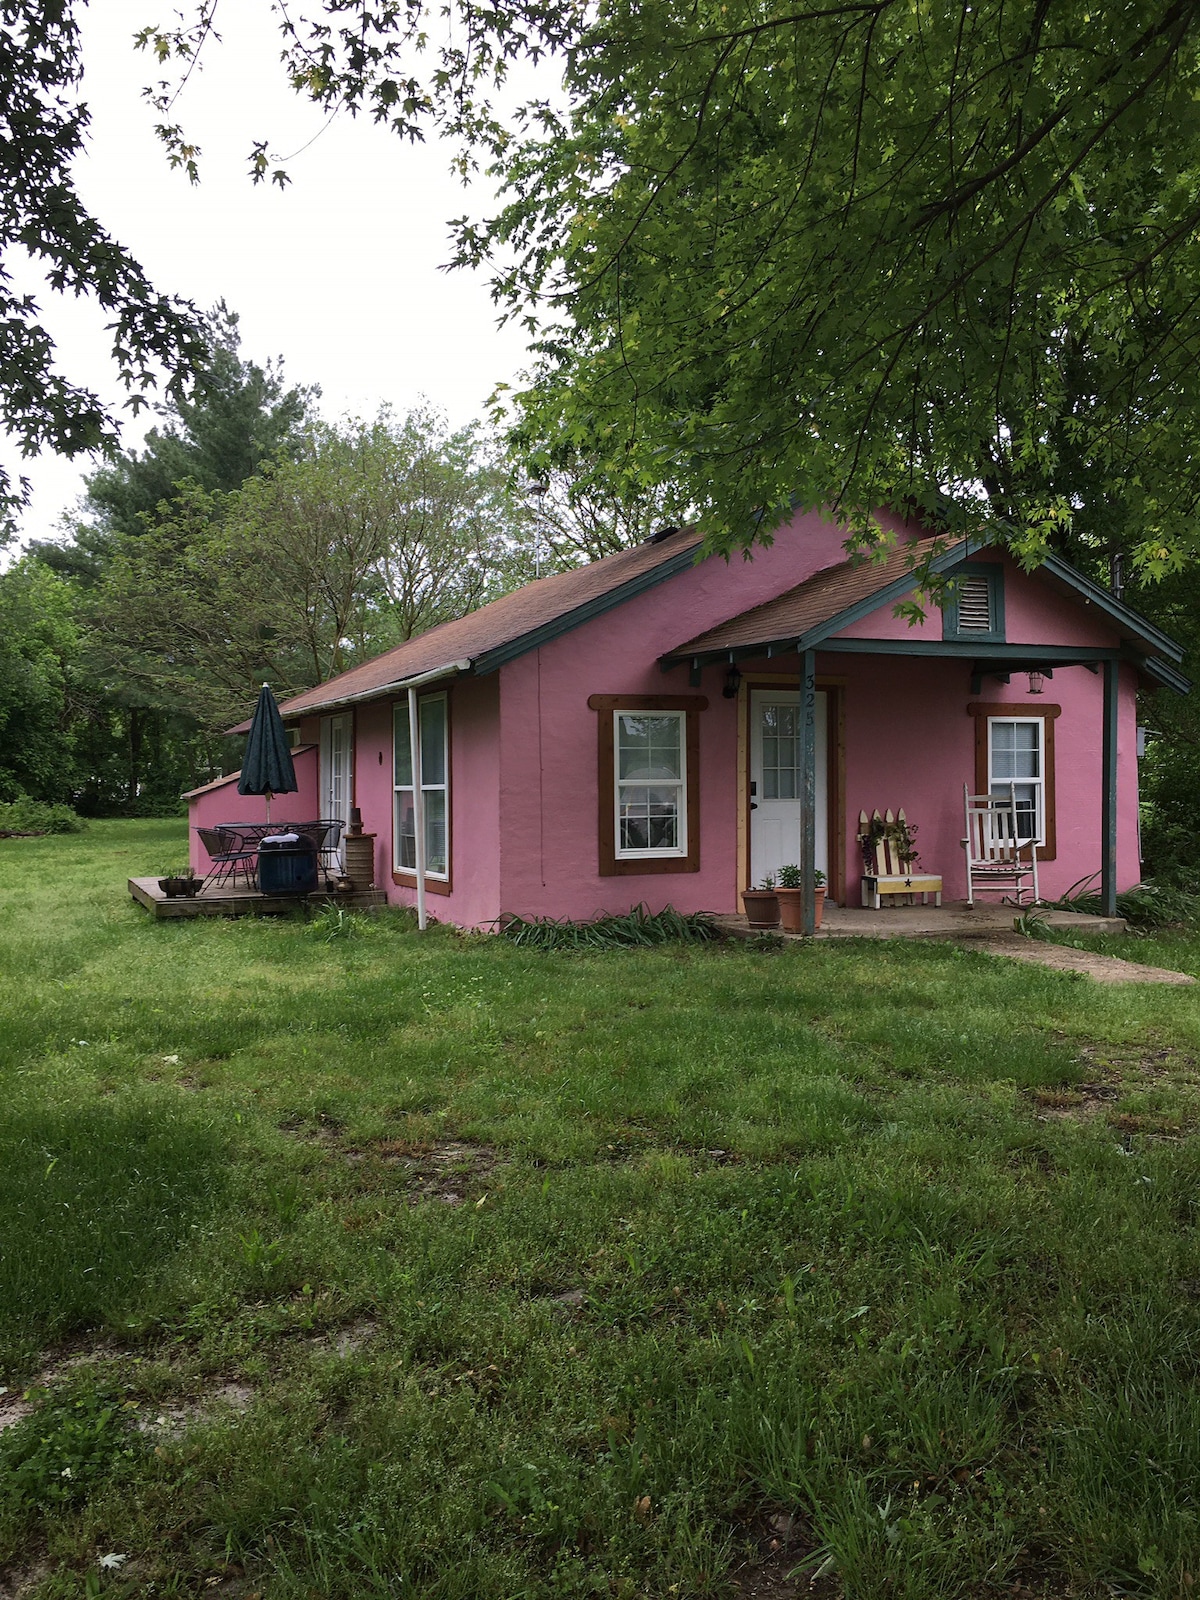 The Pink House of Blue Eye